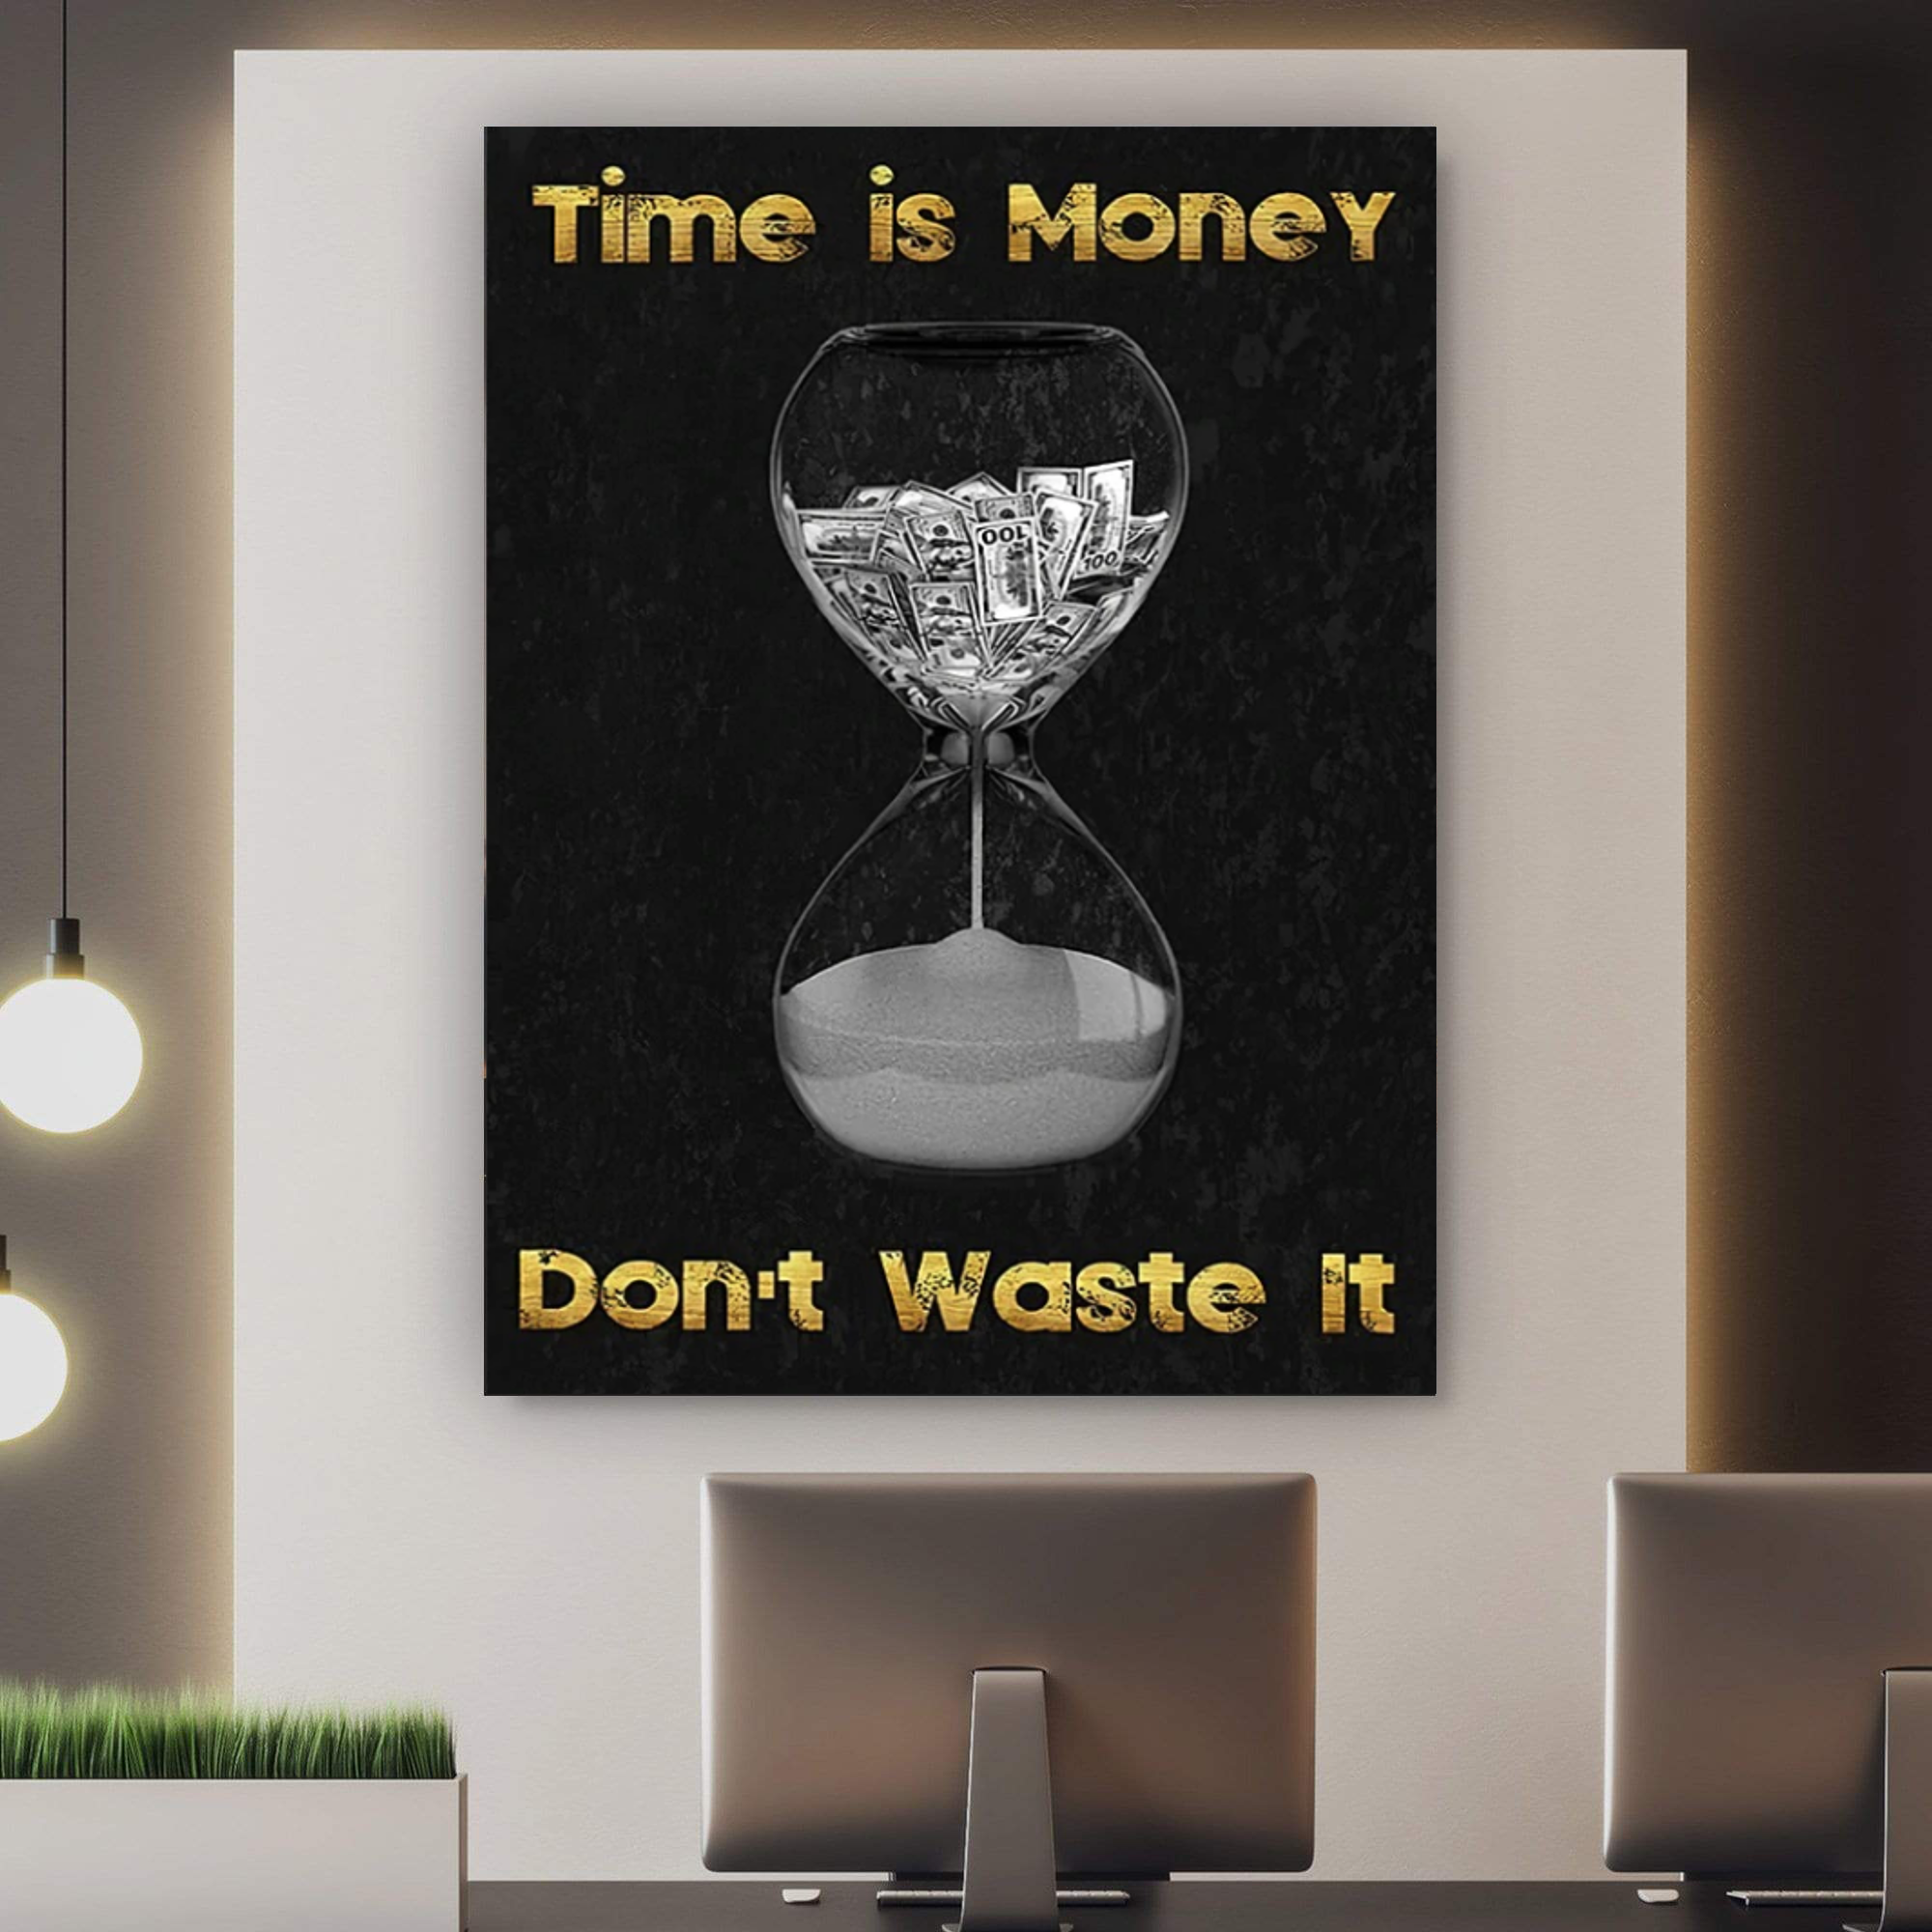 Time is Money Hour Glass